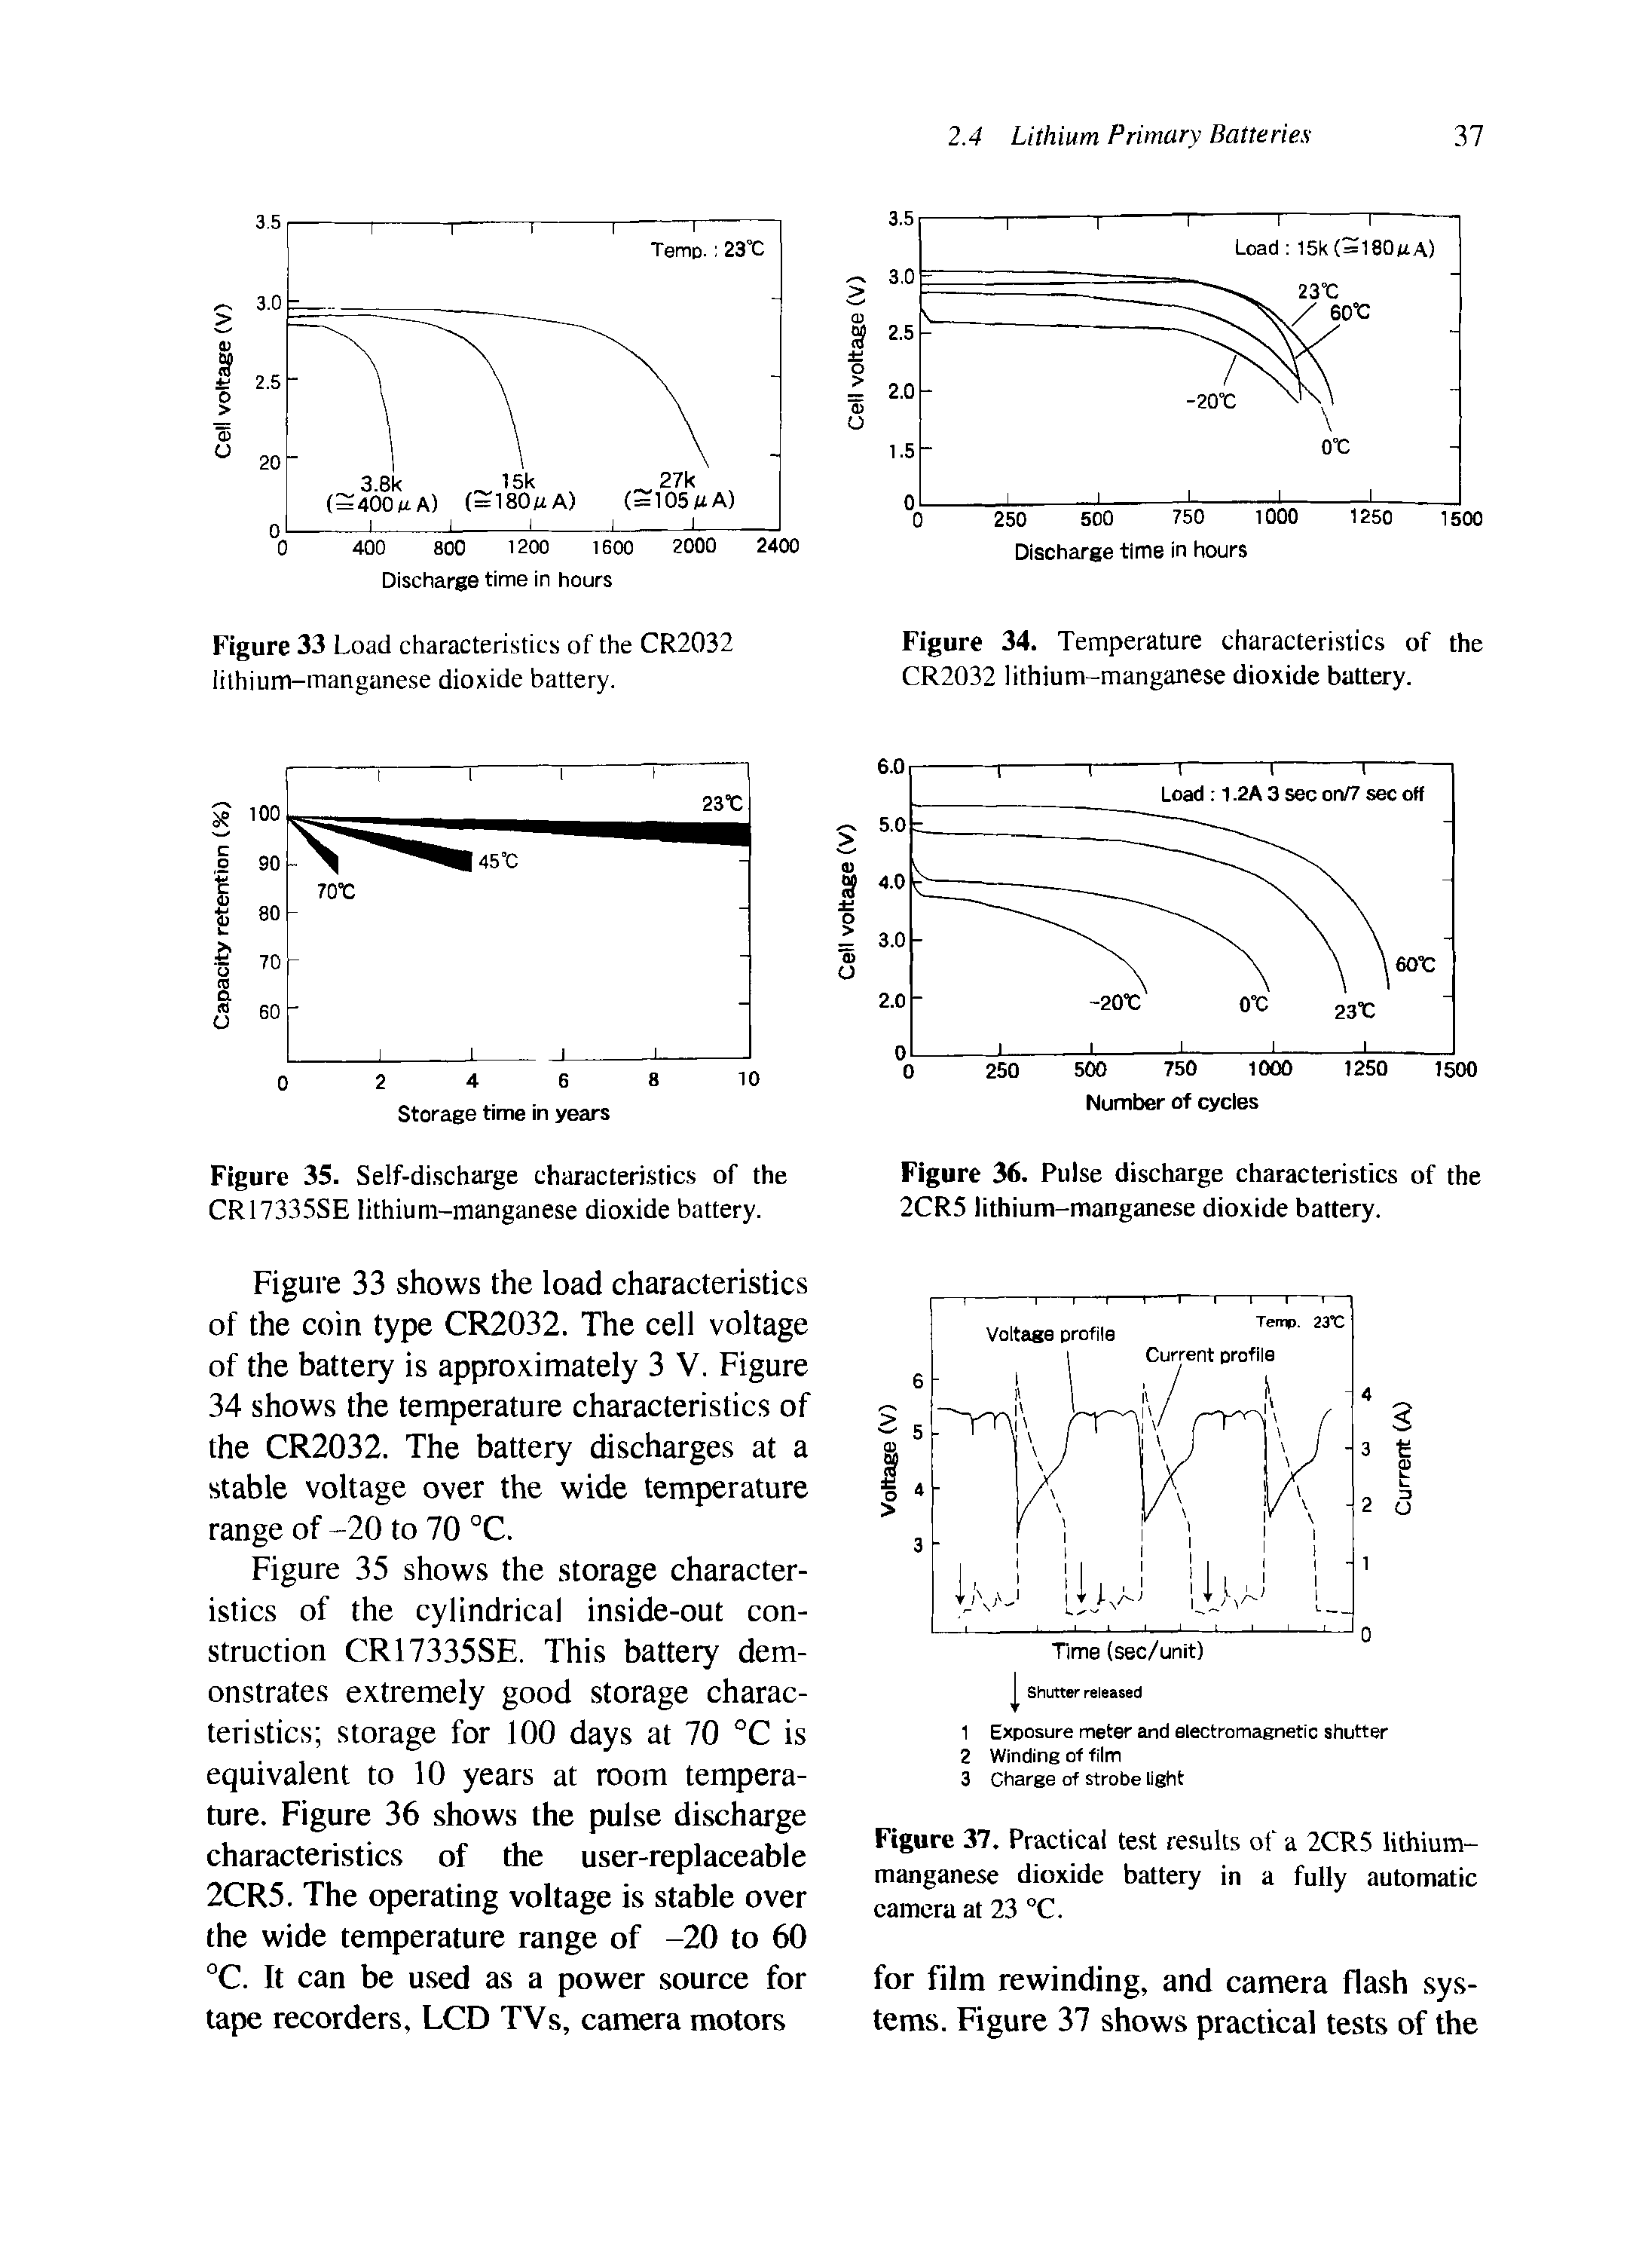 Figure 33 Load characteristics of the CR2032 lithium-manganese dioxide battery.